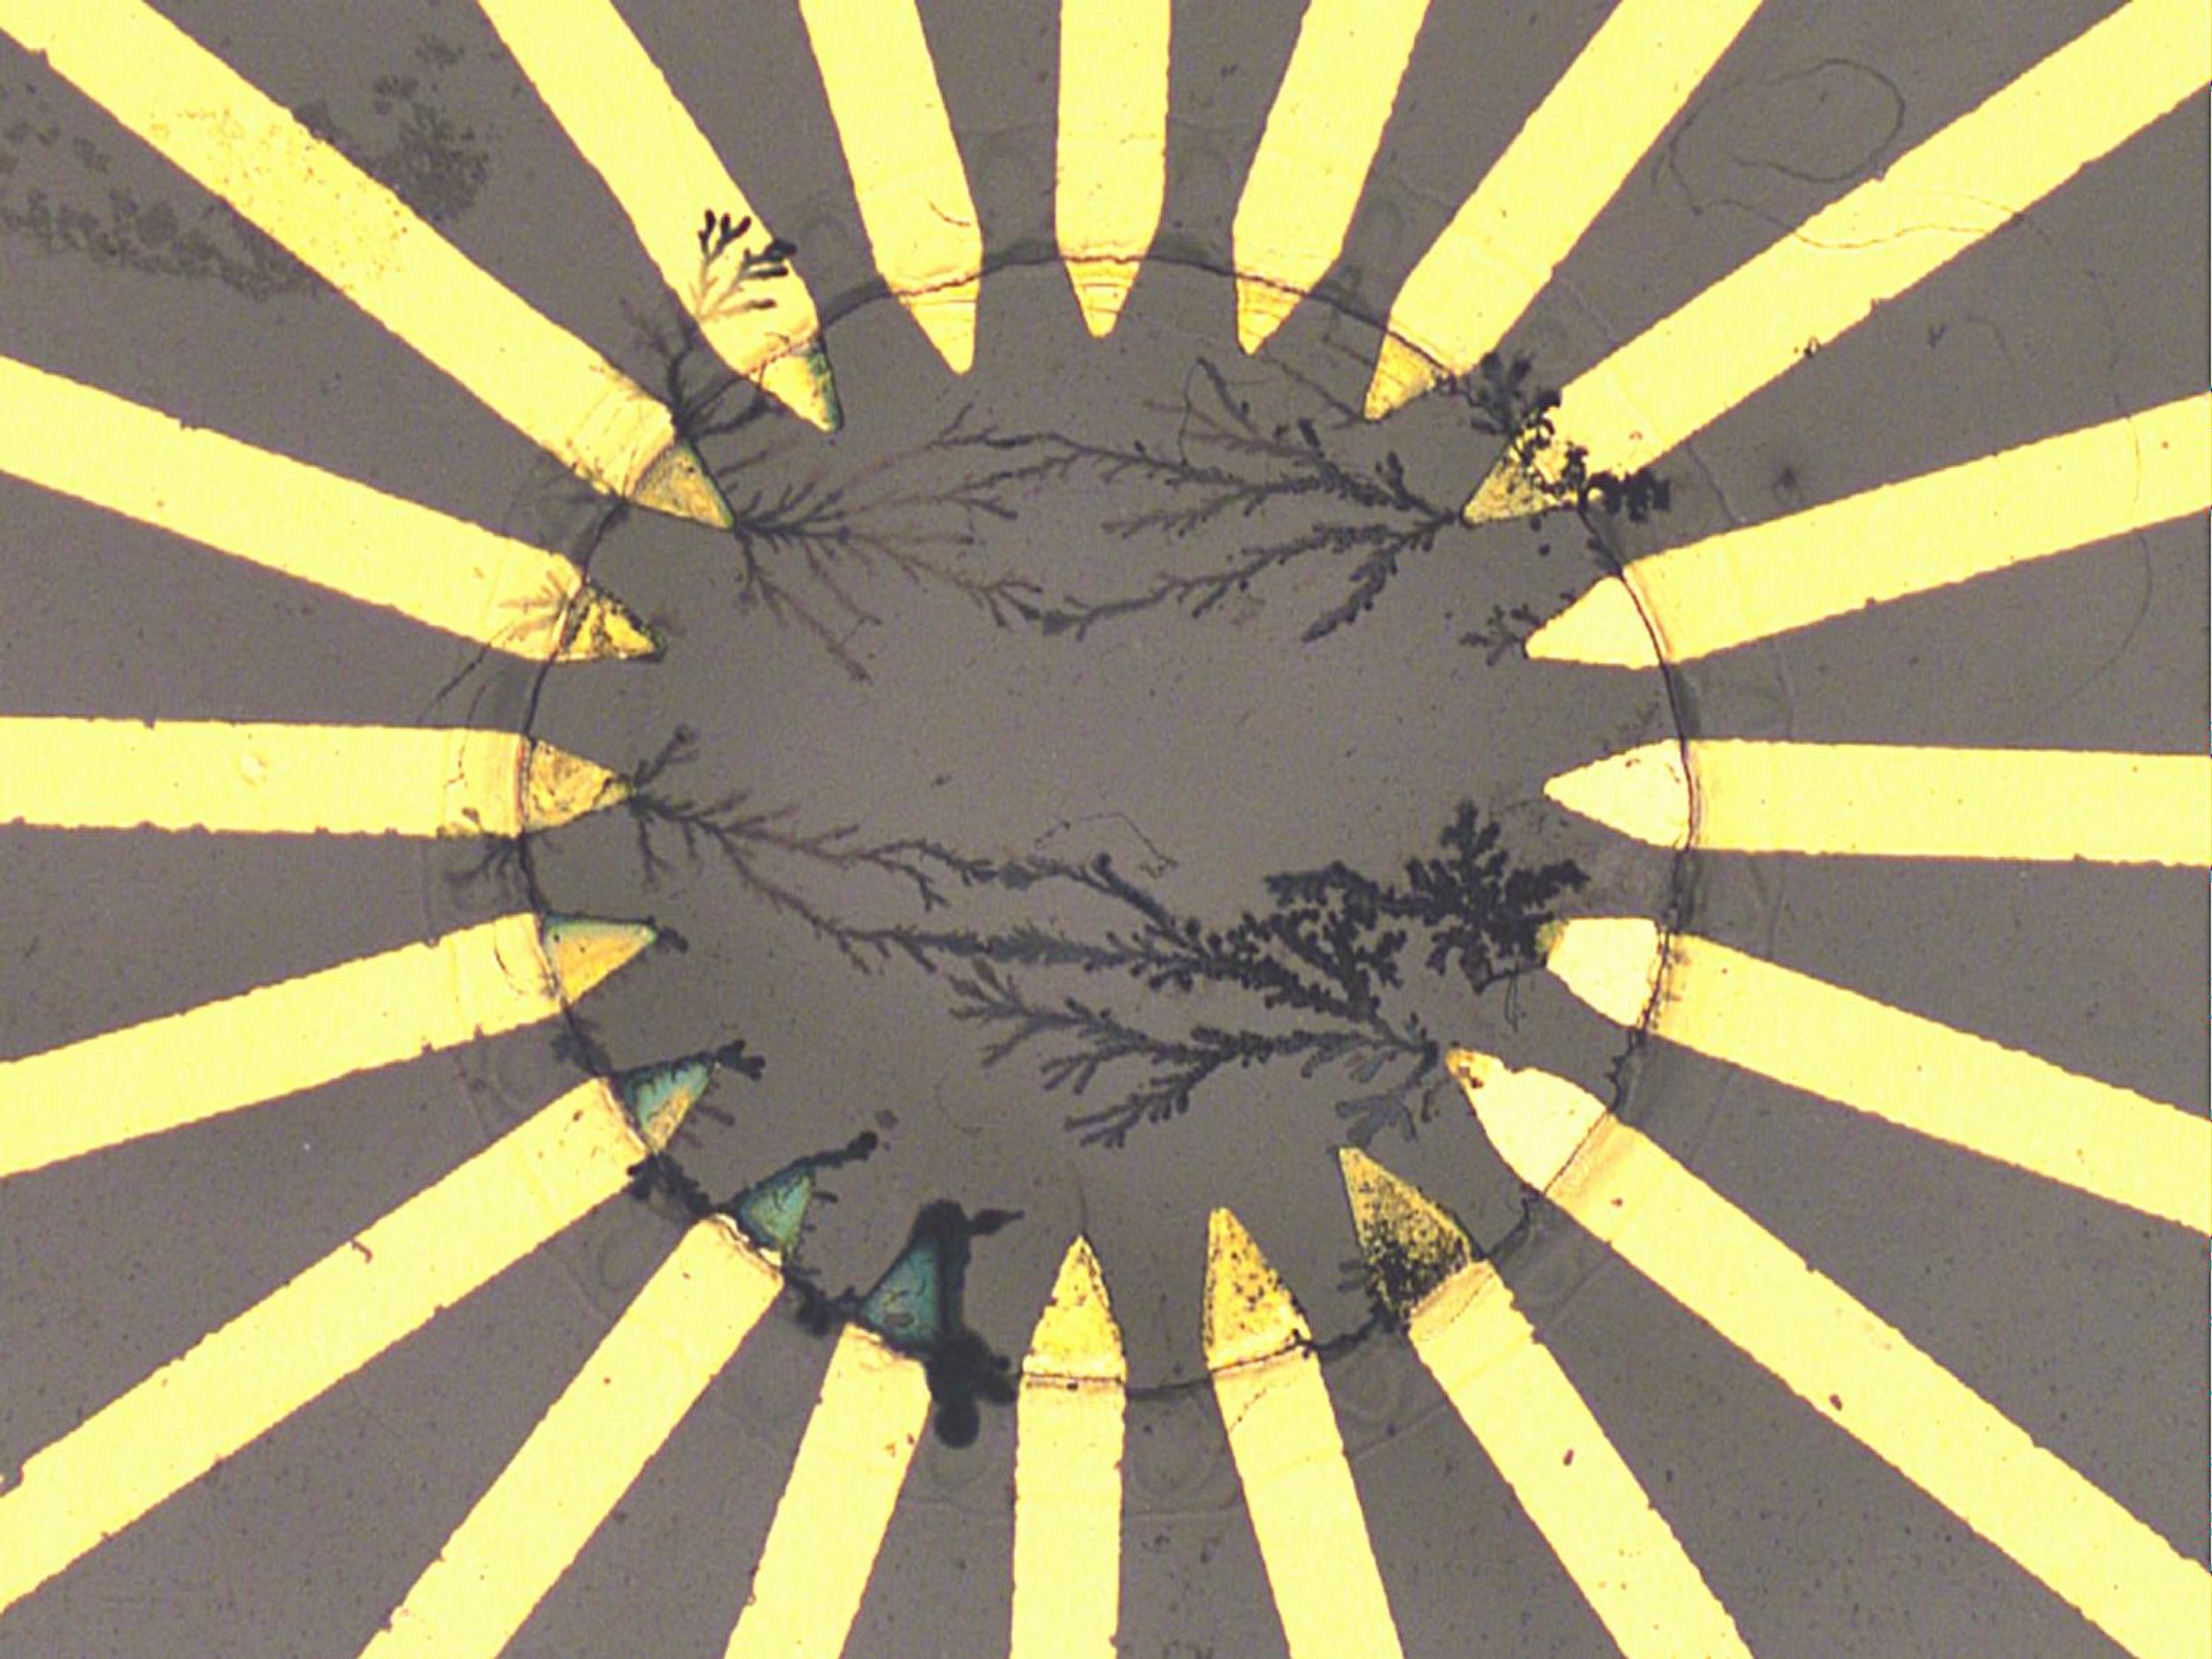 Micrograph has a grey background with a brown circular line. In the center are several branching connections, linked to some of the 20 yellow pencil shapes that go from the exterior to the interior of the circle. 